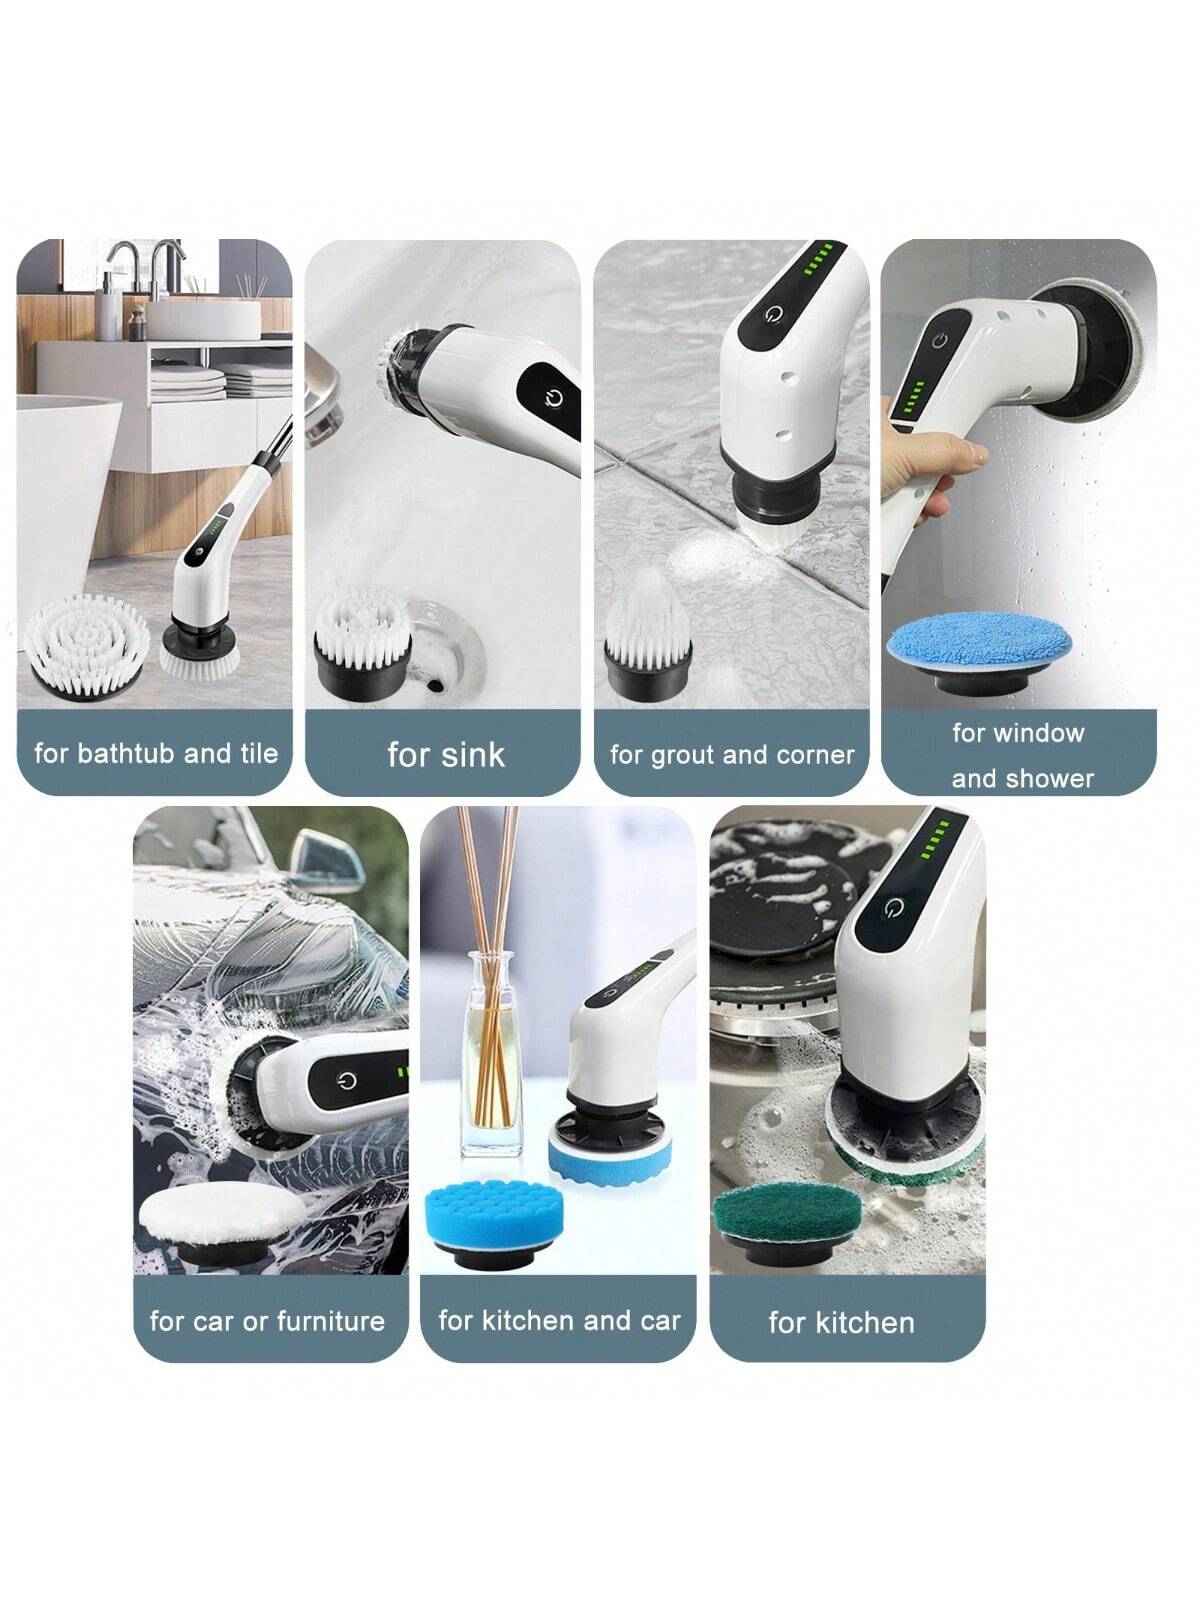 Household Electric Spin Scrubber Cordless Electric Mop, Power Spinning Scrub  Brush,Handheld Shower Cleaner Brush with 3 Replaceable Brush Heads for  Tile, Tub, Dish, Sink, Grout, Wall, Kitchen 